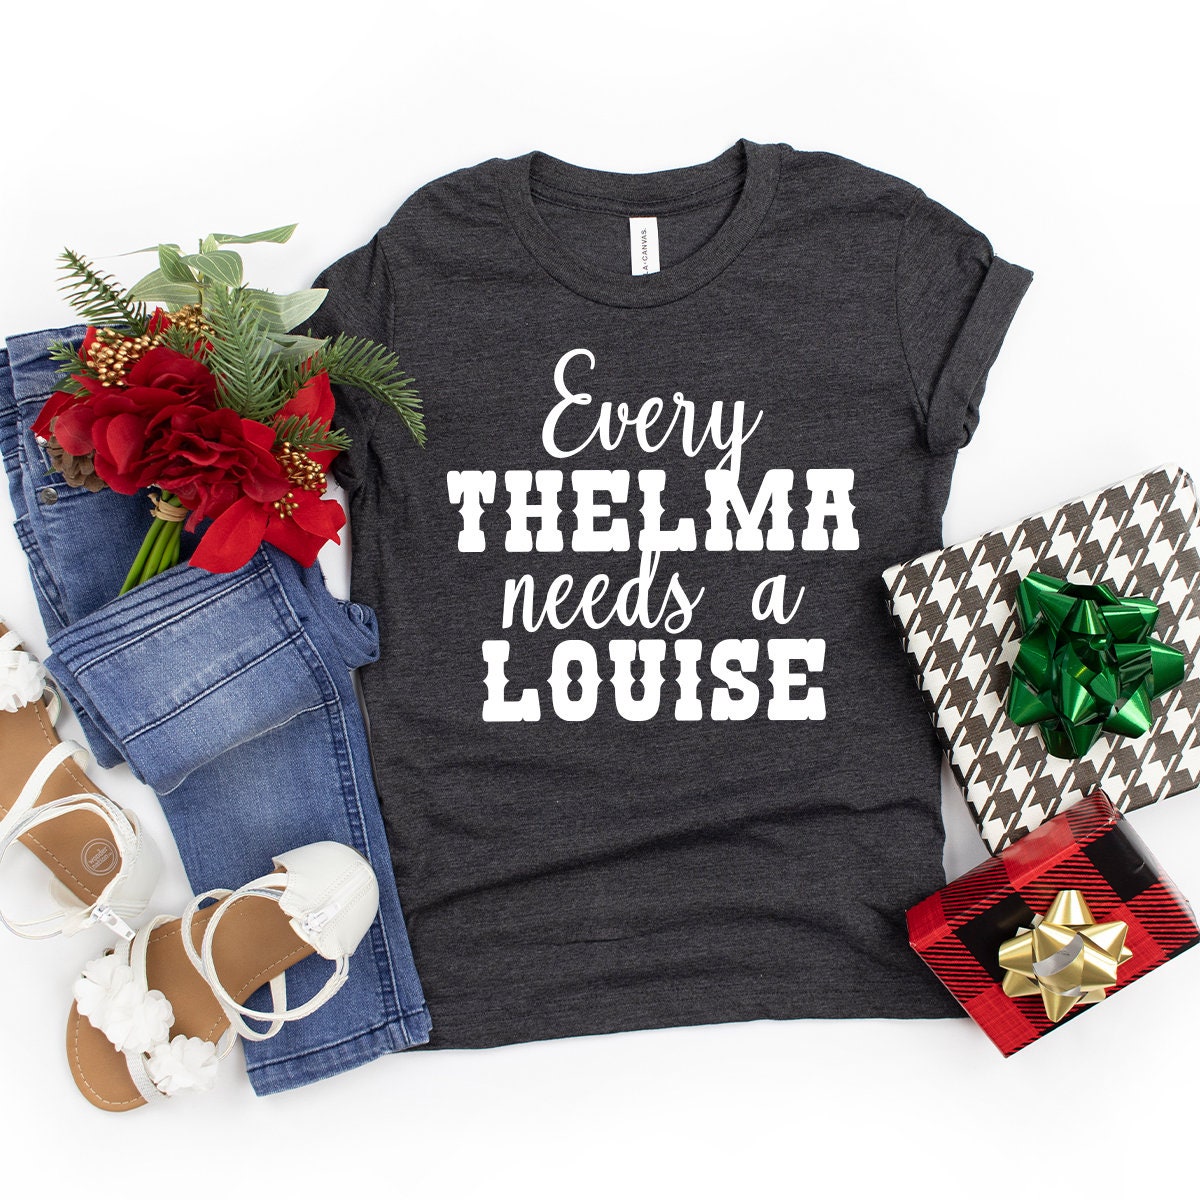 Thelma and Louise Shirts/best Friends Shirts/sisters 